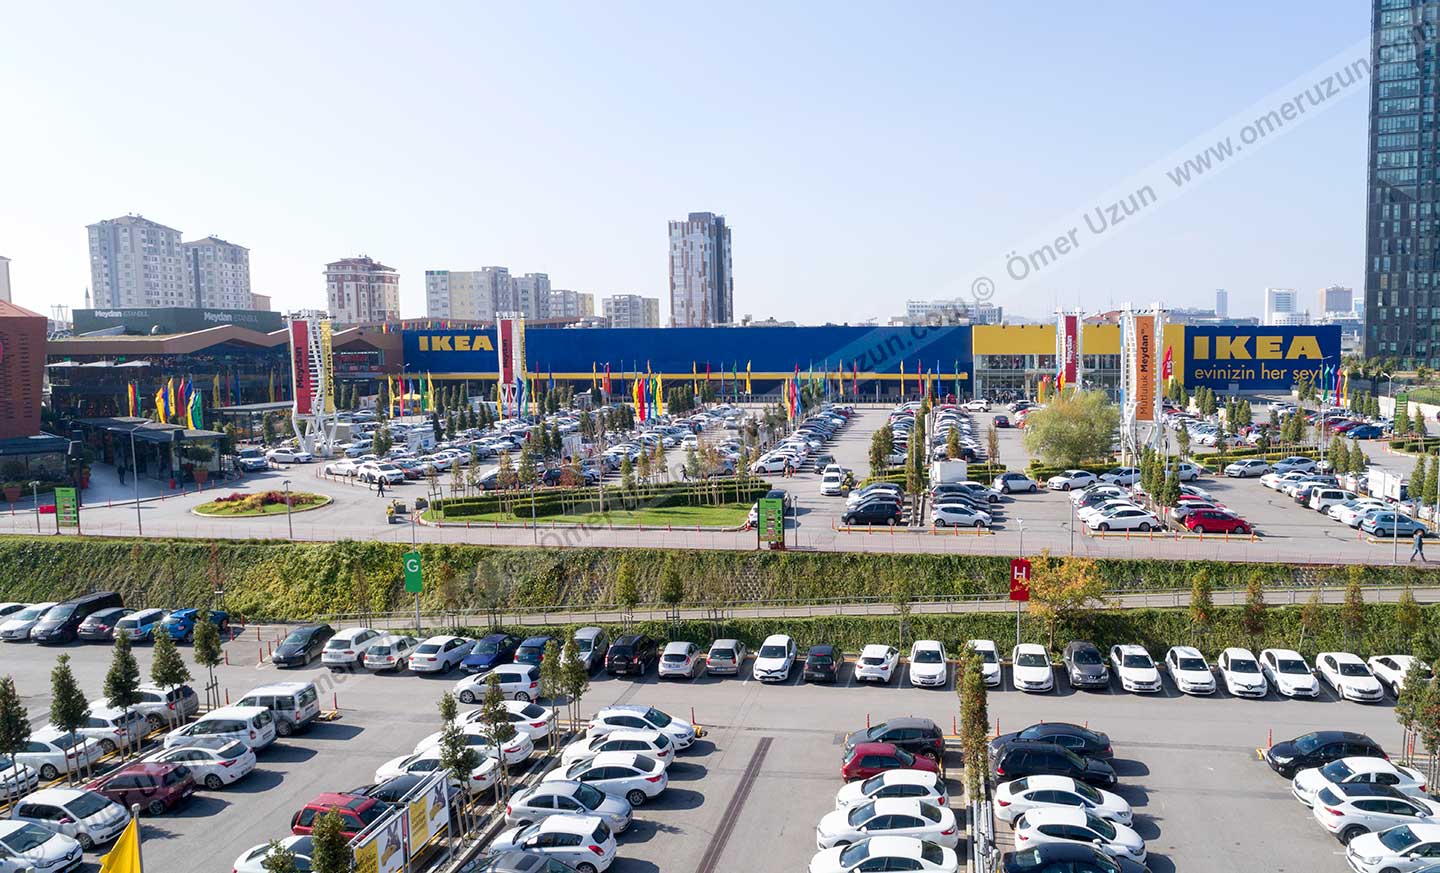 IKEA store in Turkey general view and car park